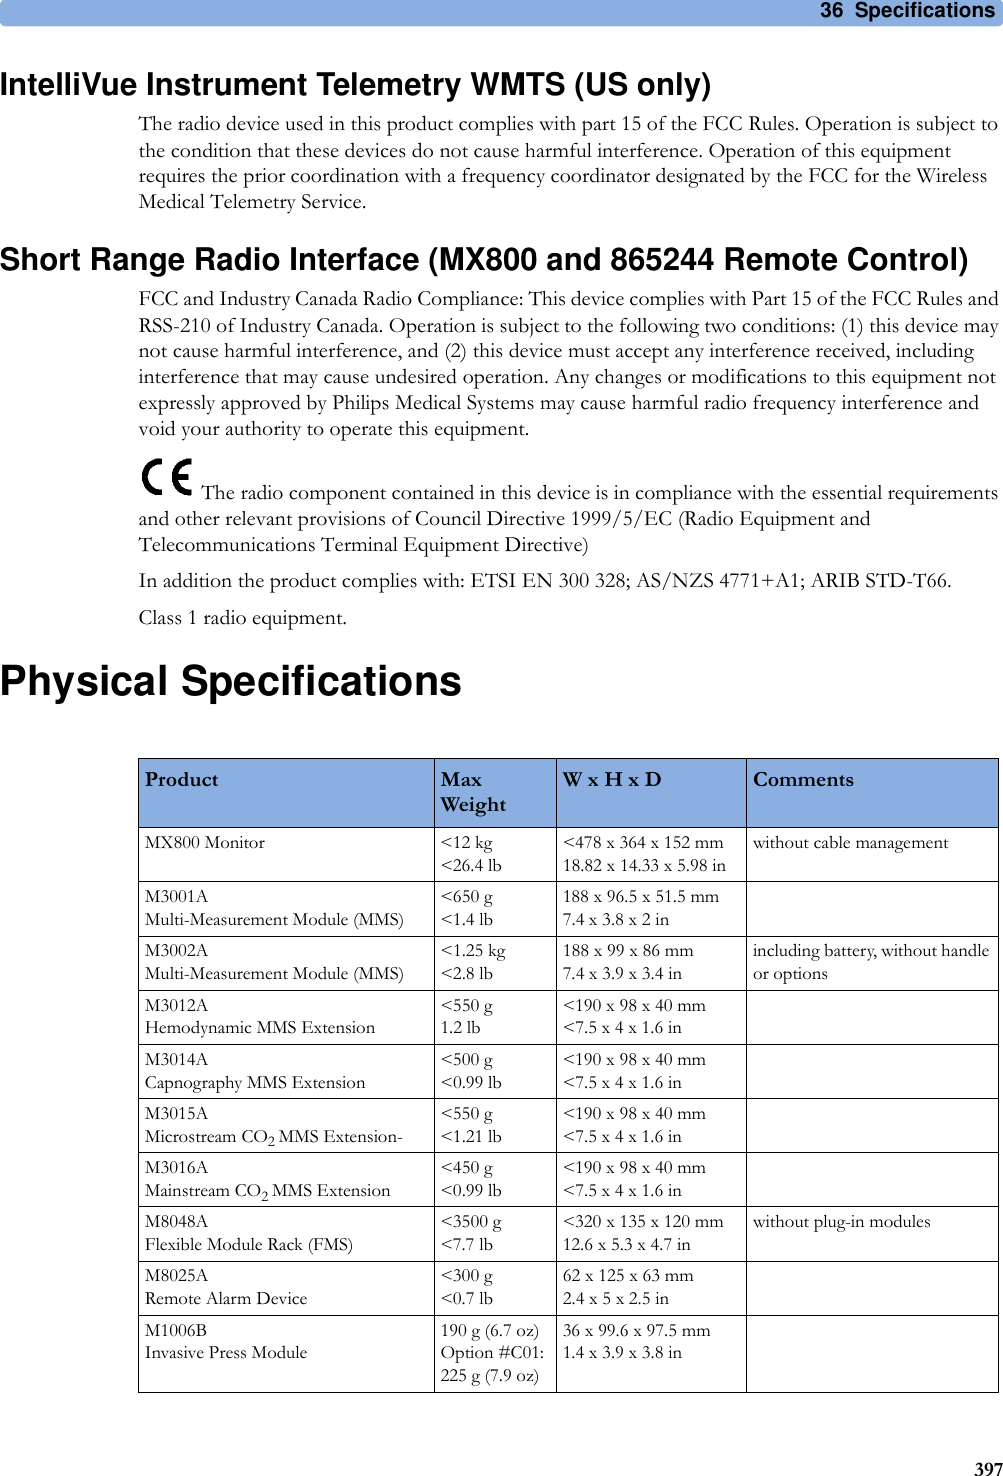 36 Specifications397IntelliVue Instrument Telemetry WMTS (US only)The radio device used in this product complies with part 15 of the FCC Rules. Operation is subject to the condition that these devices do not cause harmful interference. Operation of this equipment requires the prior coordination with a frequency coordinator designated by the FCC for the Wireless Medical Telemetry Service.Short Range Radio Interface (MX800 and 865244 Remote Control)FCC and Industry Canada Radio Compliance: This device complies with Part 15 of the FCC Rules and RSS-210 of Industry Canada. Operation is subject to the following two conditions: (1) this device may not cause harmful interference, and (2) this device must accept any interference received, including interference that may cause undesired operation. Any changes or modifications to this equipment not expressly approved by Philips Medical Systems may cause harmful radio frequency interference and void your authority to operate this equipment. The radio component contained in this device is in compliance with the essential requirements and other relevant provisions of Council Directive 1999/5/EC (Radio Equipment and Telecommunications Terminal Equipment Directive)In addition the product complies with: ETSI EN 300 328; AS/NZS 4771+A1; ARIB STD-T66.Class 1 radio equipment.Physical SpecificationsProduct Max WeightW x H x D CommentsMX800 Monitor &lt;12 kg&lt;26.4 lb&lt;478 x 364 x 152 mm18.82 x 14.33 x 5.98 inwithout cable managementM3001AMulti-Measurement Module (MMS)&lt;650 g&lt;1.4 lb188 x 96.5 x 51.5 mm7.4 x 3.8 x 2 inM3002AMulti-Measurement Module (MMS)&lt;1.25 kg&lt;2.8 lb188 x 99 x 86 mm7.4 x 3.9 x 3.4 inincluding battery, without handle or optionsM3012AHemodynamic MMS Extension&lt;550 g1.2 lb&lt;190 x 98 x 40 mm&lt;7.5 x 4 x 1.6 inM3014ACapnography MMS Extension&lt;500 g&lt;0.99 lb&lt;190 x 98 x 40 mm&lt;7.5 x 4 x 1.6 inM3015AMicrostream CO2 MMS Extension-&lt;550 g&lt;1.21 lb&lt;190 x 98 x 40 mm&lt;7.5 x 4 x 1.6 inM3016AMainstream CO2 MMS Extension&lt;450 g&lt;0.99 lb&lt;190 x 98 x 40 mm&lt;7.5 x 4 x 1.6 inM8048AFlexible Module Rack (FMS)&lt;3500 g&lt;7.7 lb&lt;320 x 135 x 120 mm12.6 x 5.3 x 4.7 inwithout plug-in modulesM8025ARemote Alarm Device&lt;300 g&lt;0.7 lb62 x 125 x 63 mm2.4 x 5 x 2.5 inM1006BInvasive Press Module190 g (6.7 oz)Option #C01: 225 g (7.9 oz)36 x 99.6 x 97.5 mm1.4 x 3.9 x 3.8 in